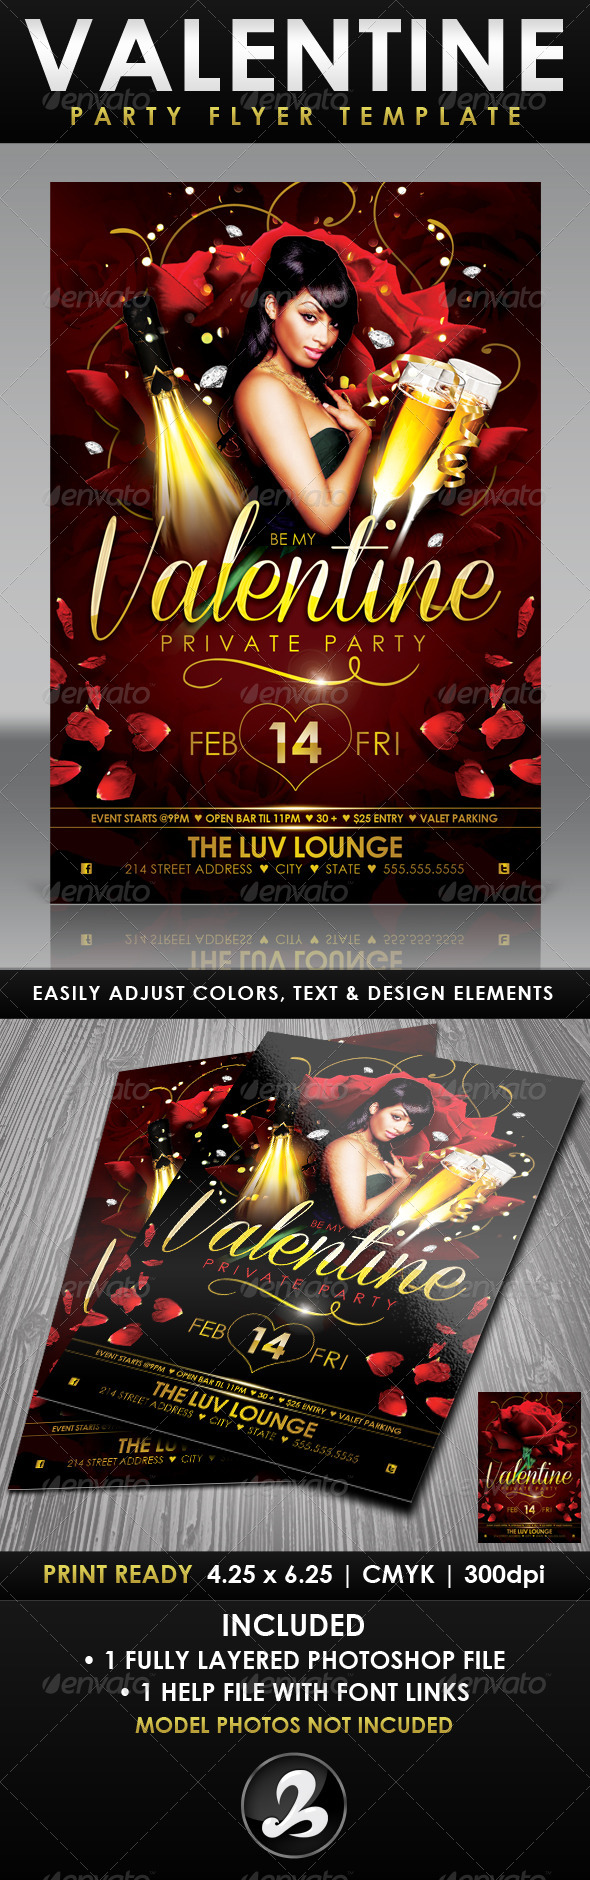 Valentine Private Party Flyer Template